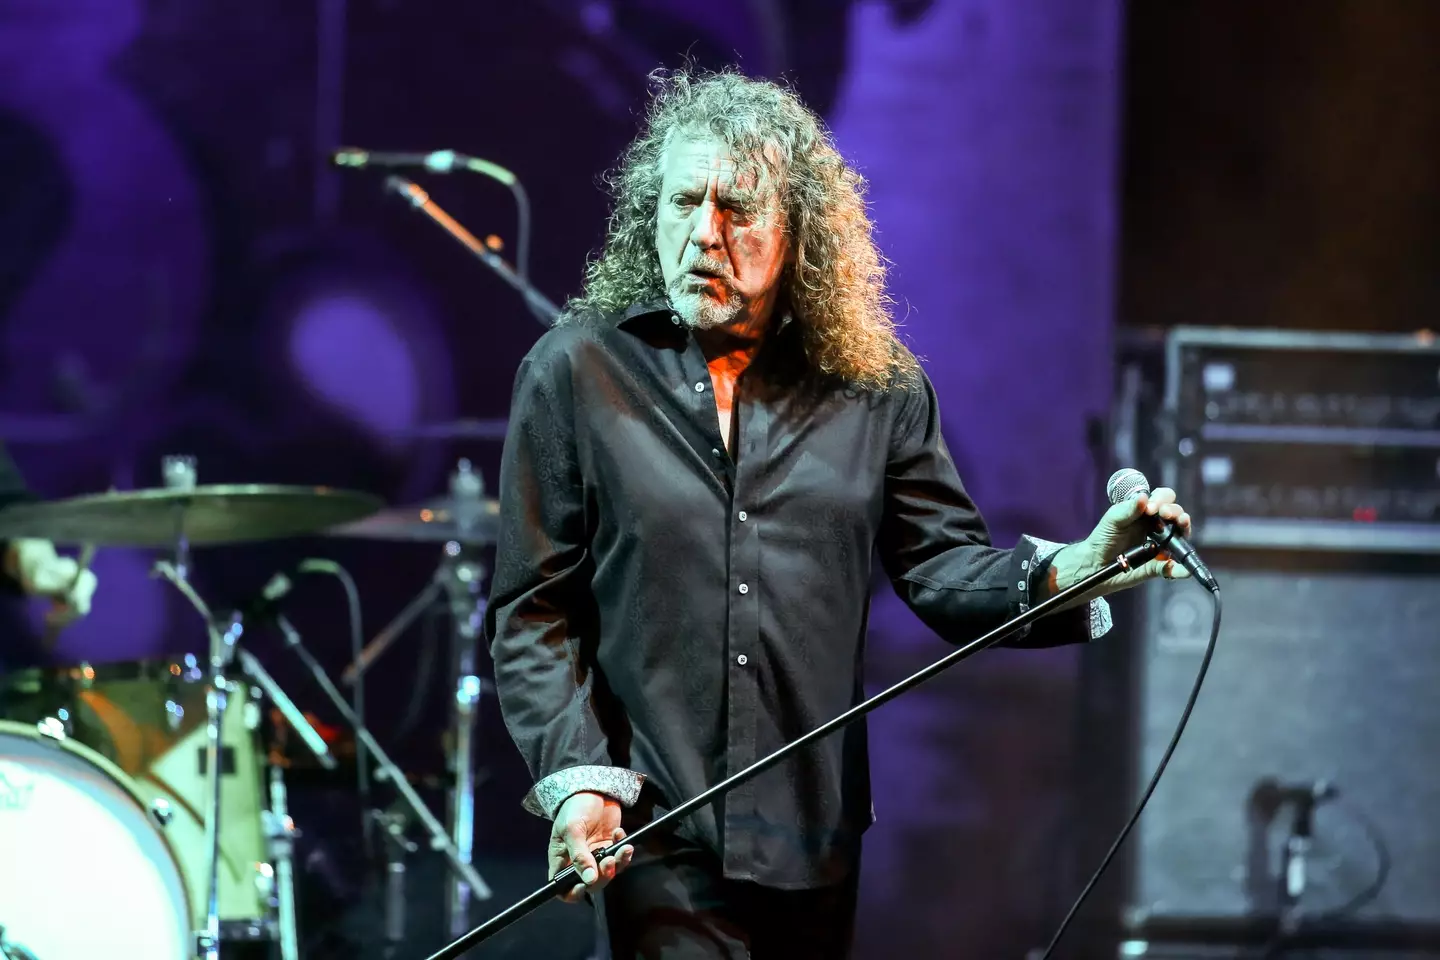 Led Zeppelin's lead vocalist Robert Plant is the Beavertown founder's dad.